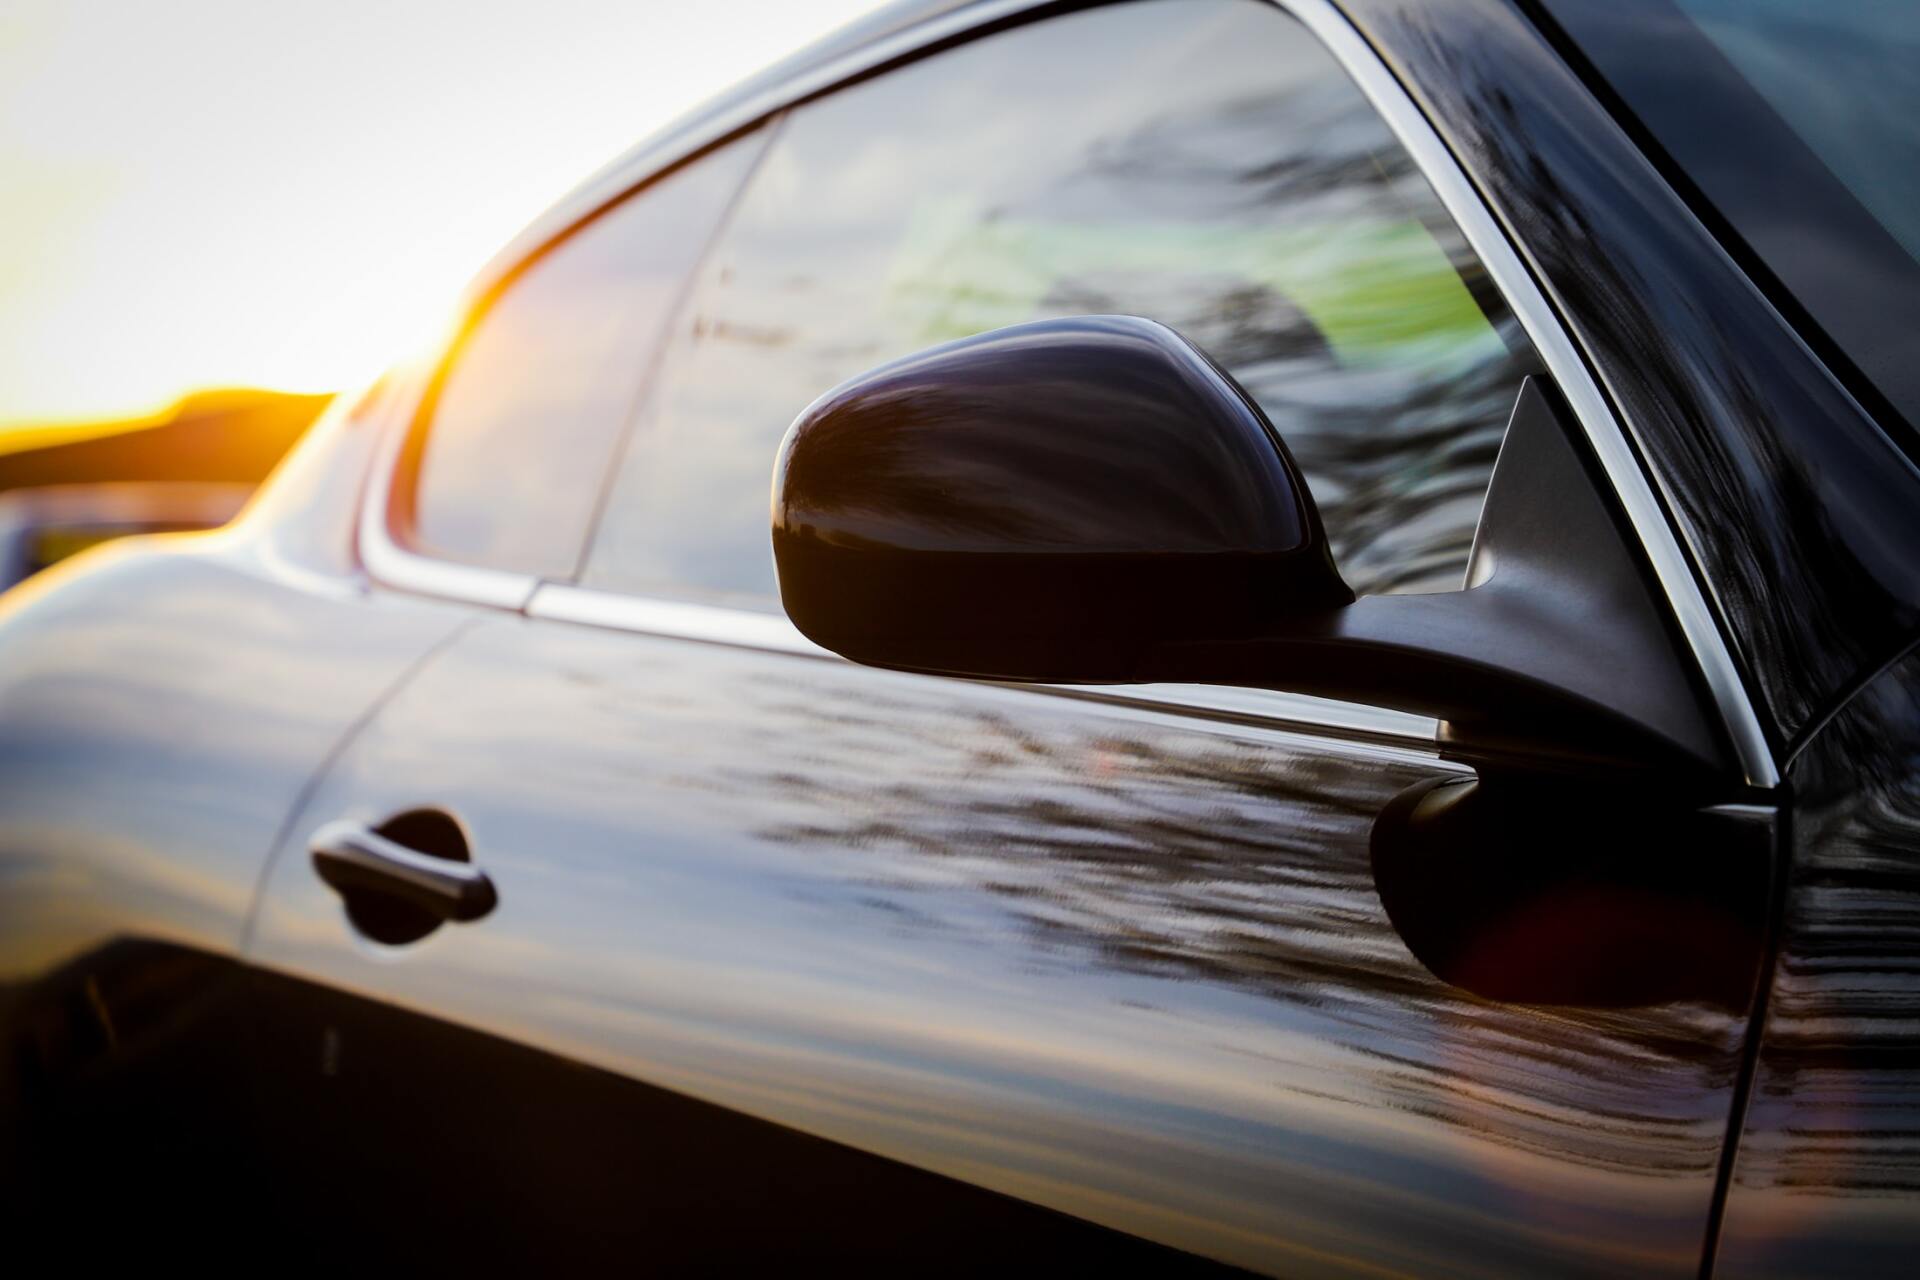 8 Things to Know Before Having Your Car Windows Tinted